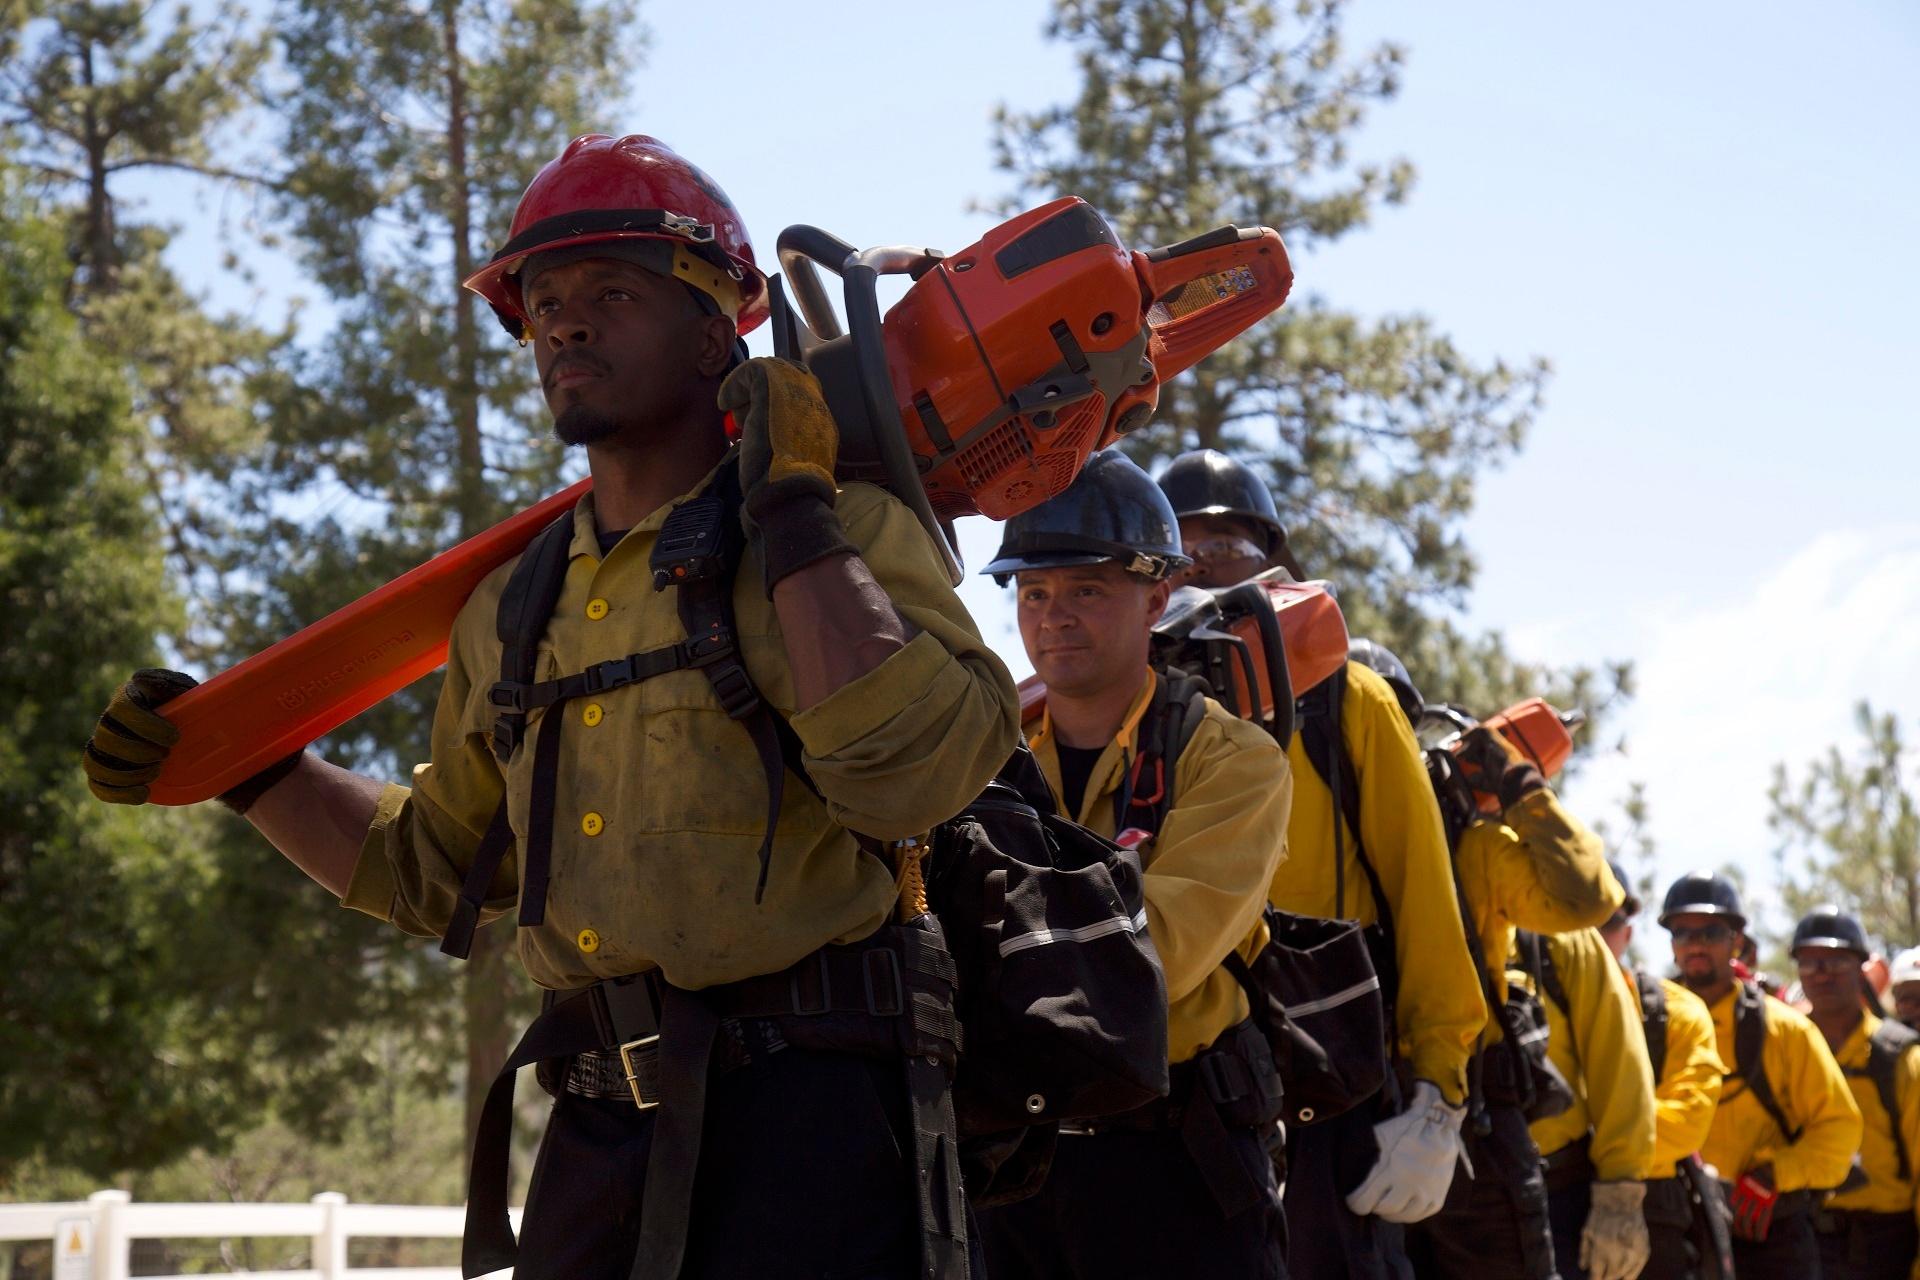 Forestry and Fire Recruitment Program students training and working in Mountain Center, CA